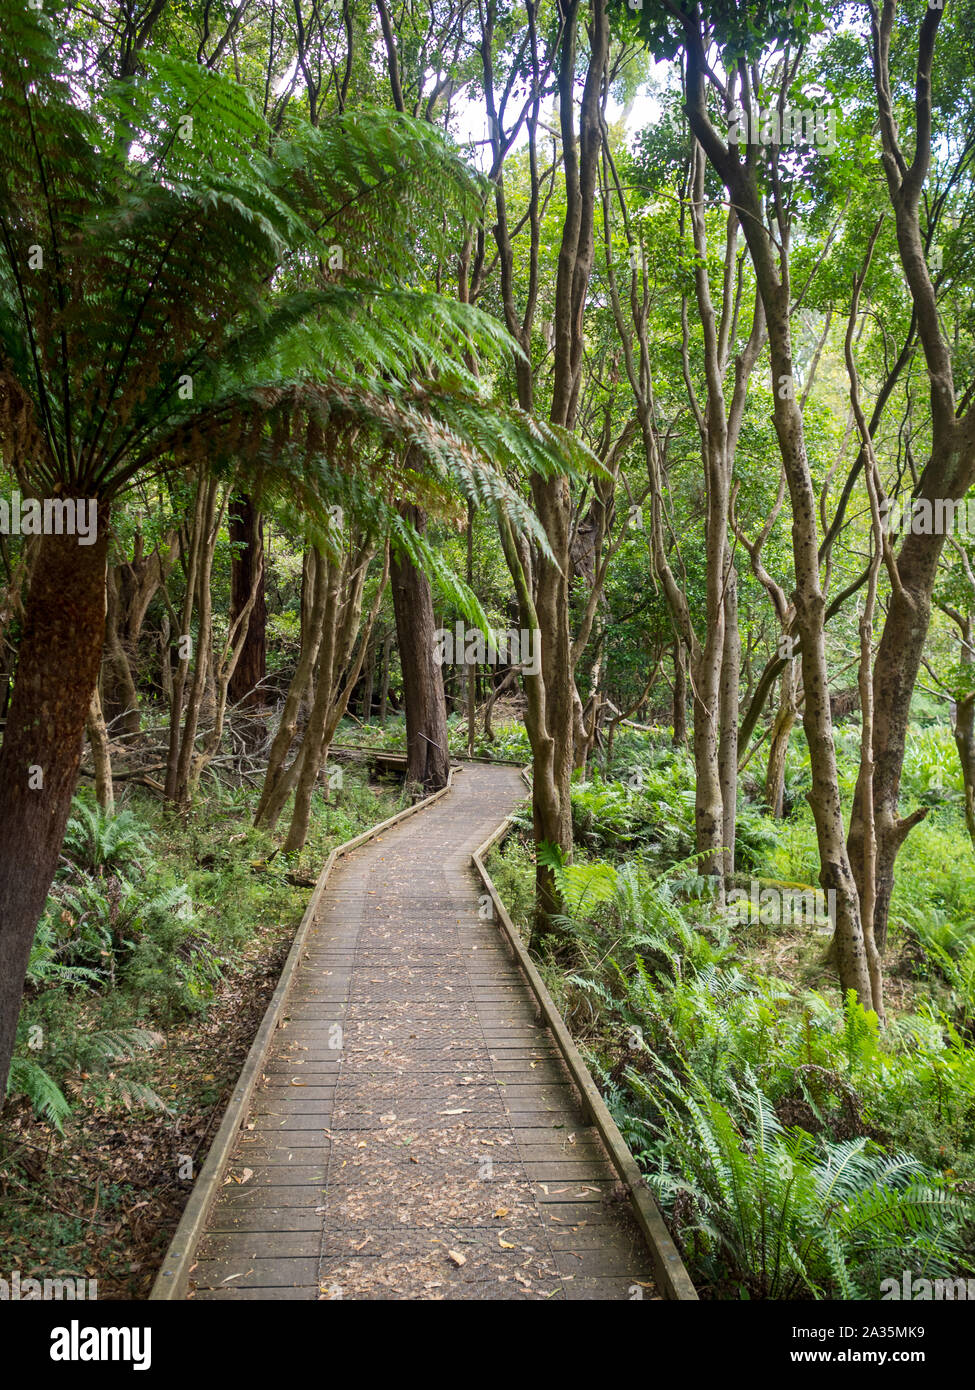 Lush vegetation and giant ferns in Lilly Pilly Gully Circuit trail Stock Photo